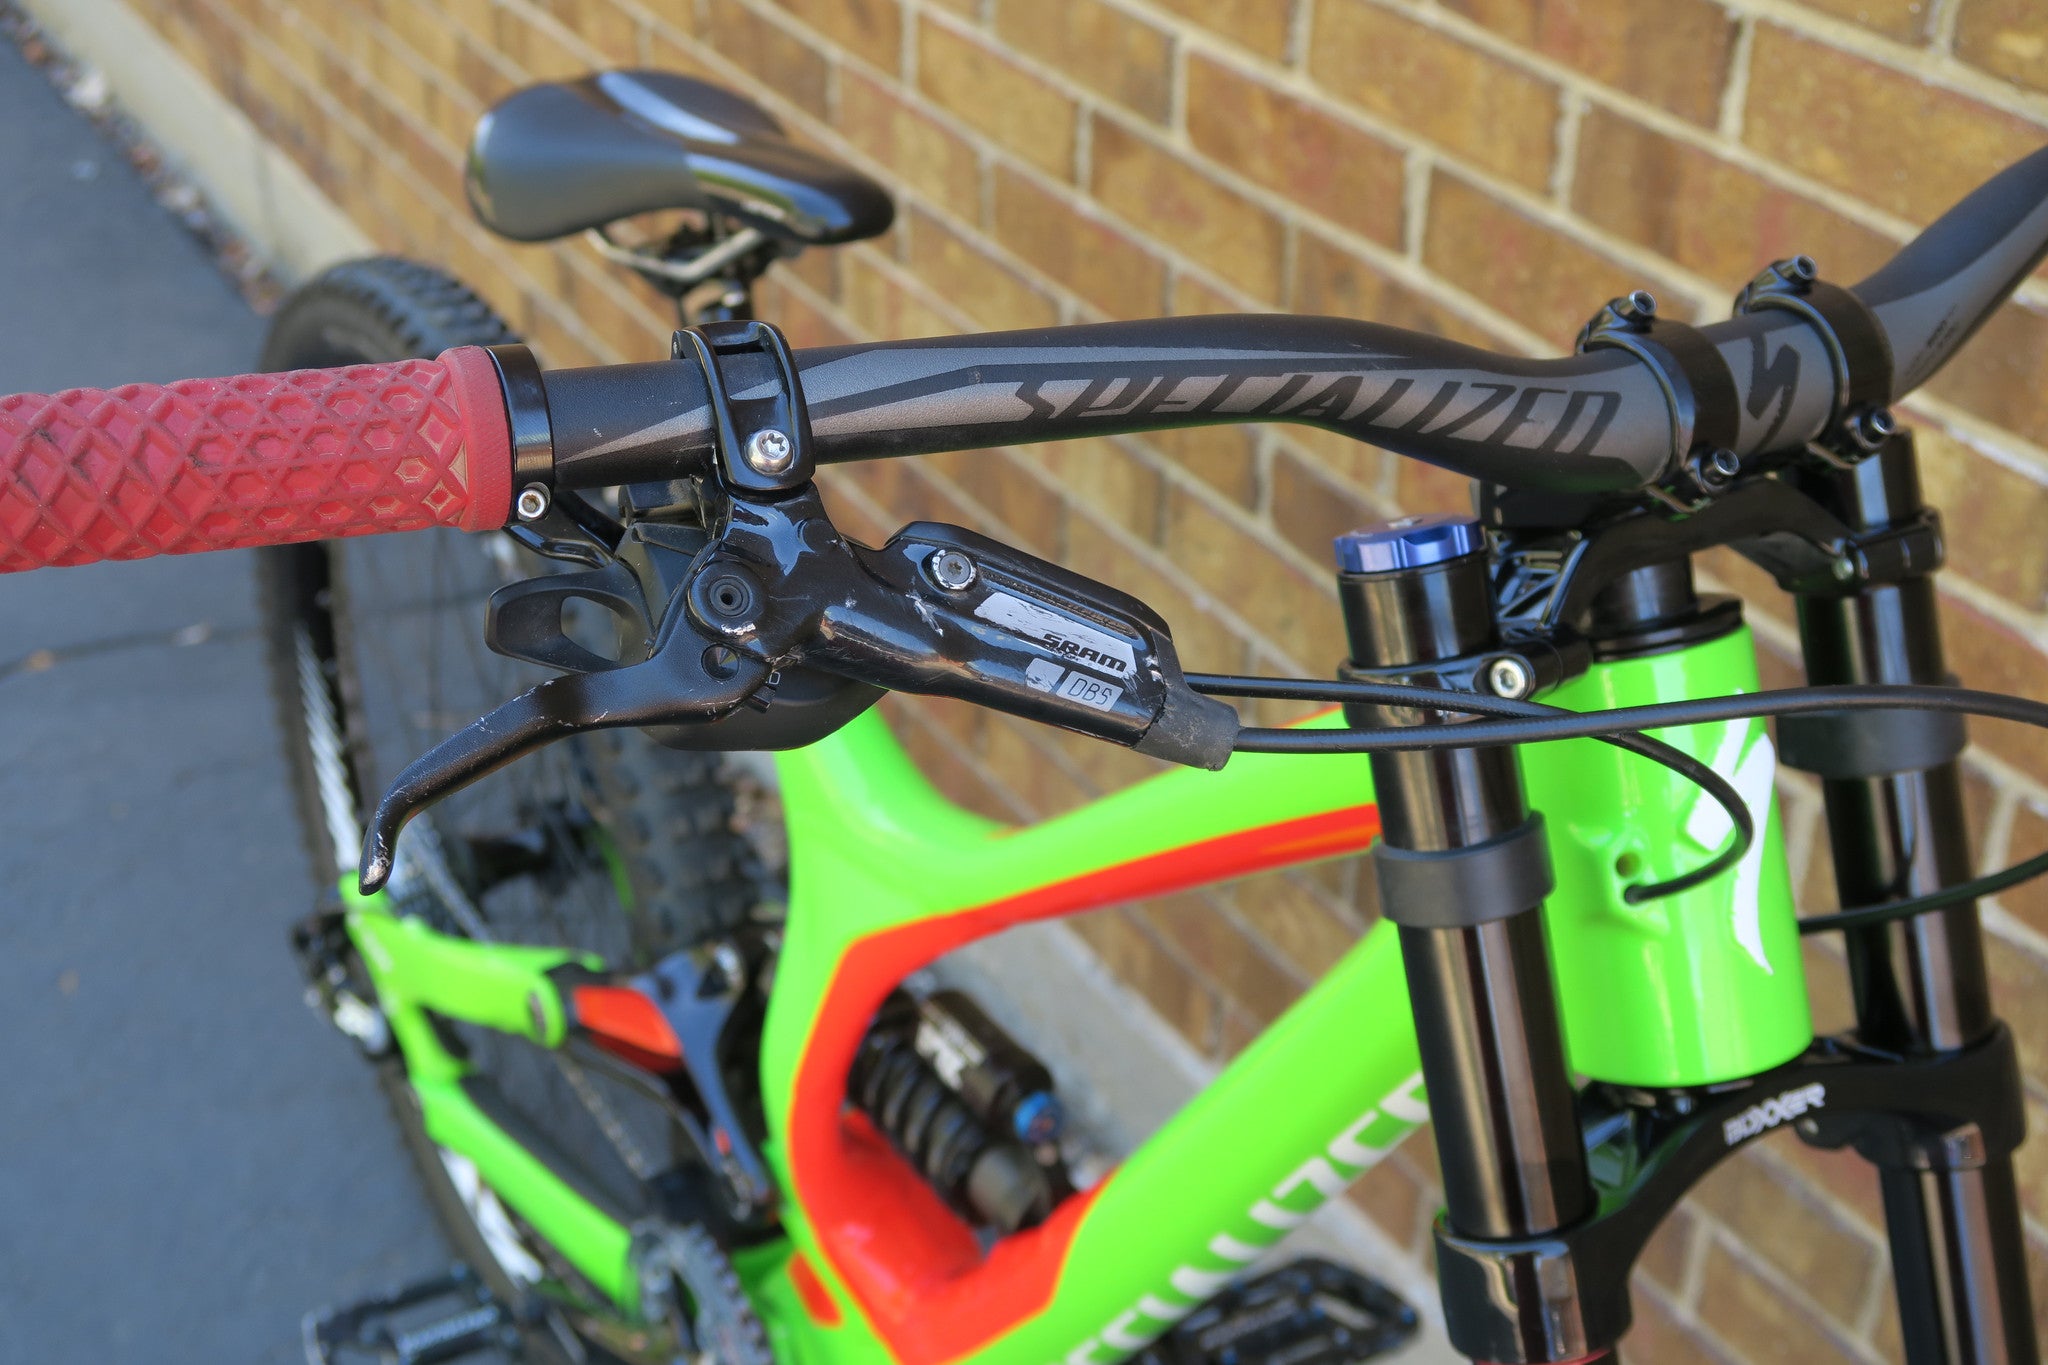 2016 SPECIALIZED DEMO 8 l ALLOY 27.5